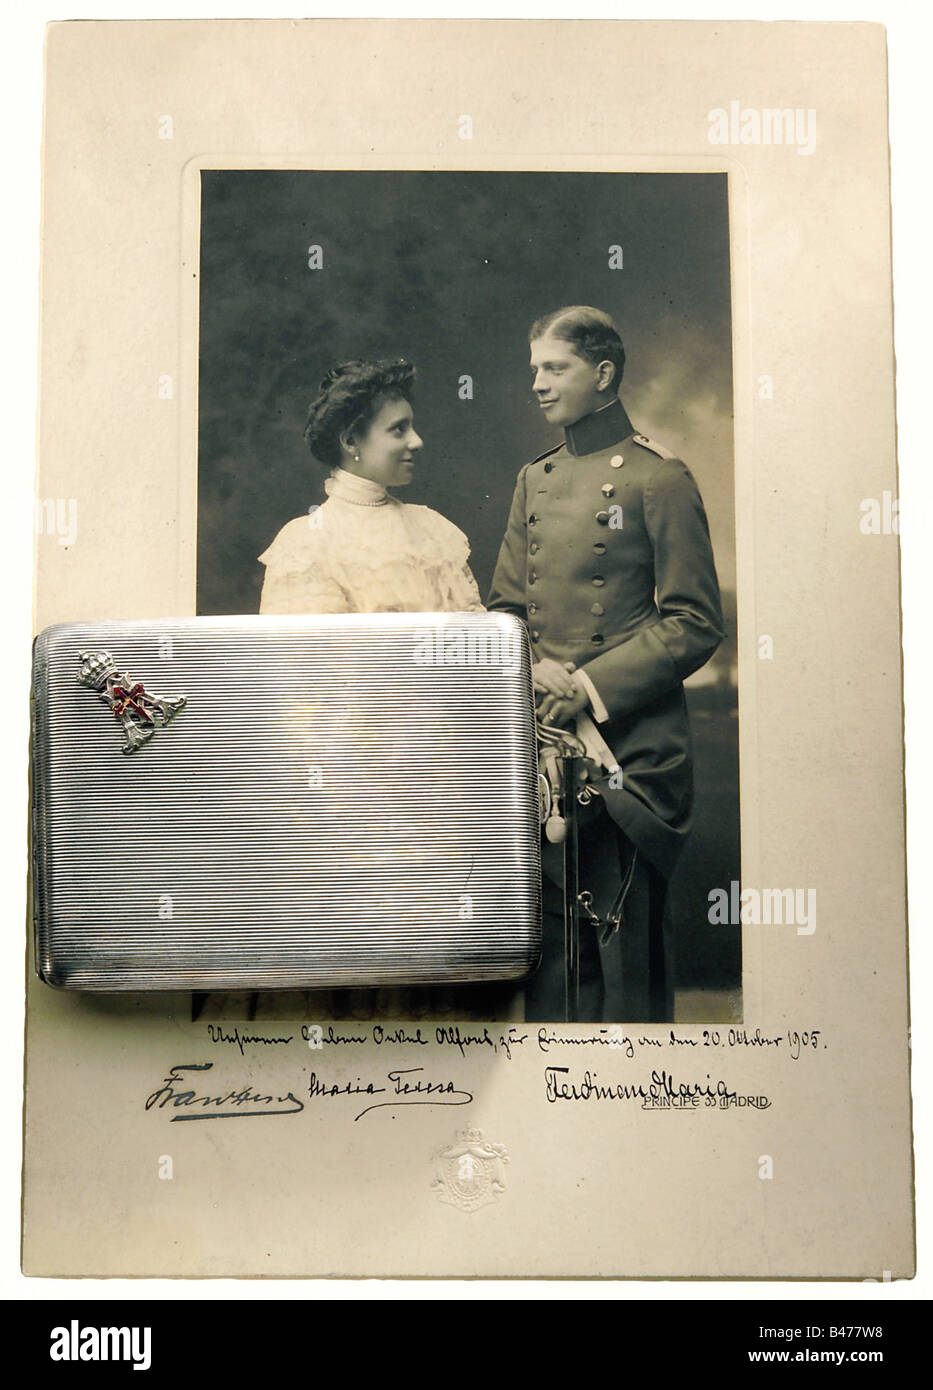 Prince Alfons - a cigarette case, a gift from his nephew Ferdinand Maria on 20 October 1905. Silver. The Prince's crowned monogram "A" on the lid with a red enamelled cross of the Order of St. Jacob. The interior is gold-plated and engraved "dem lieben Onkel Alfons am 20. Oktober 1905 - Ferdinand Maria" (to Dear Uncle Alfons on 20 October 1905 - Ferdinand Maria). Hallmark "900" and master's mark "LW". Closed dimensions 12 x 9 cm. Weight 182 g. There is also a large presentation photograph of Prince Ferdinand Maria and his wife, Maria Theresa with a handwritten , Stock Photo